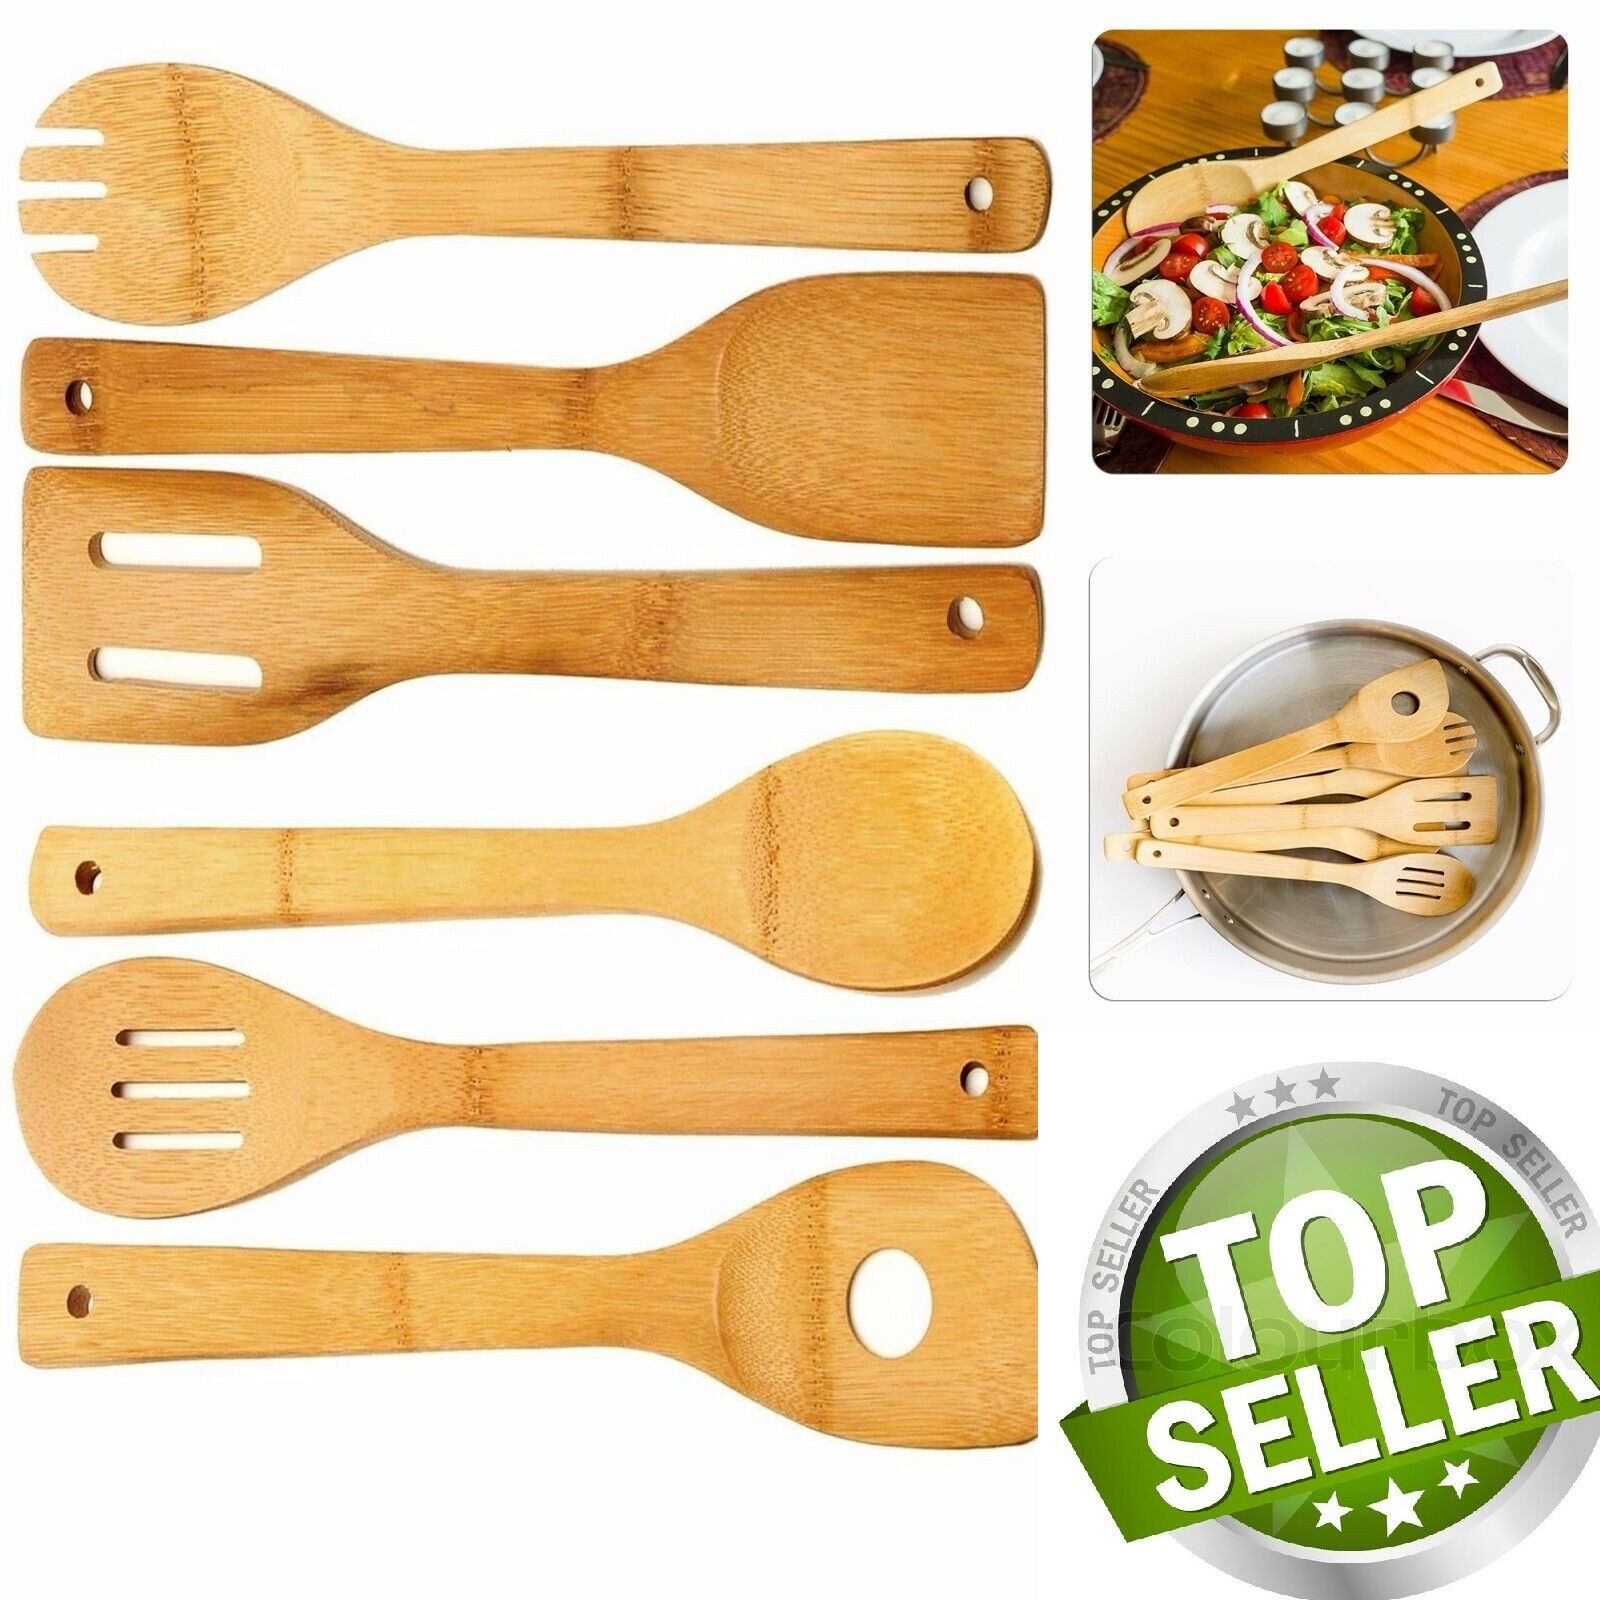 6 Piece Wooden Cooking Utensil Set Bamboo Kitchen Spatula Spoons Tools Wood Kit